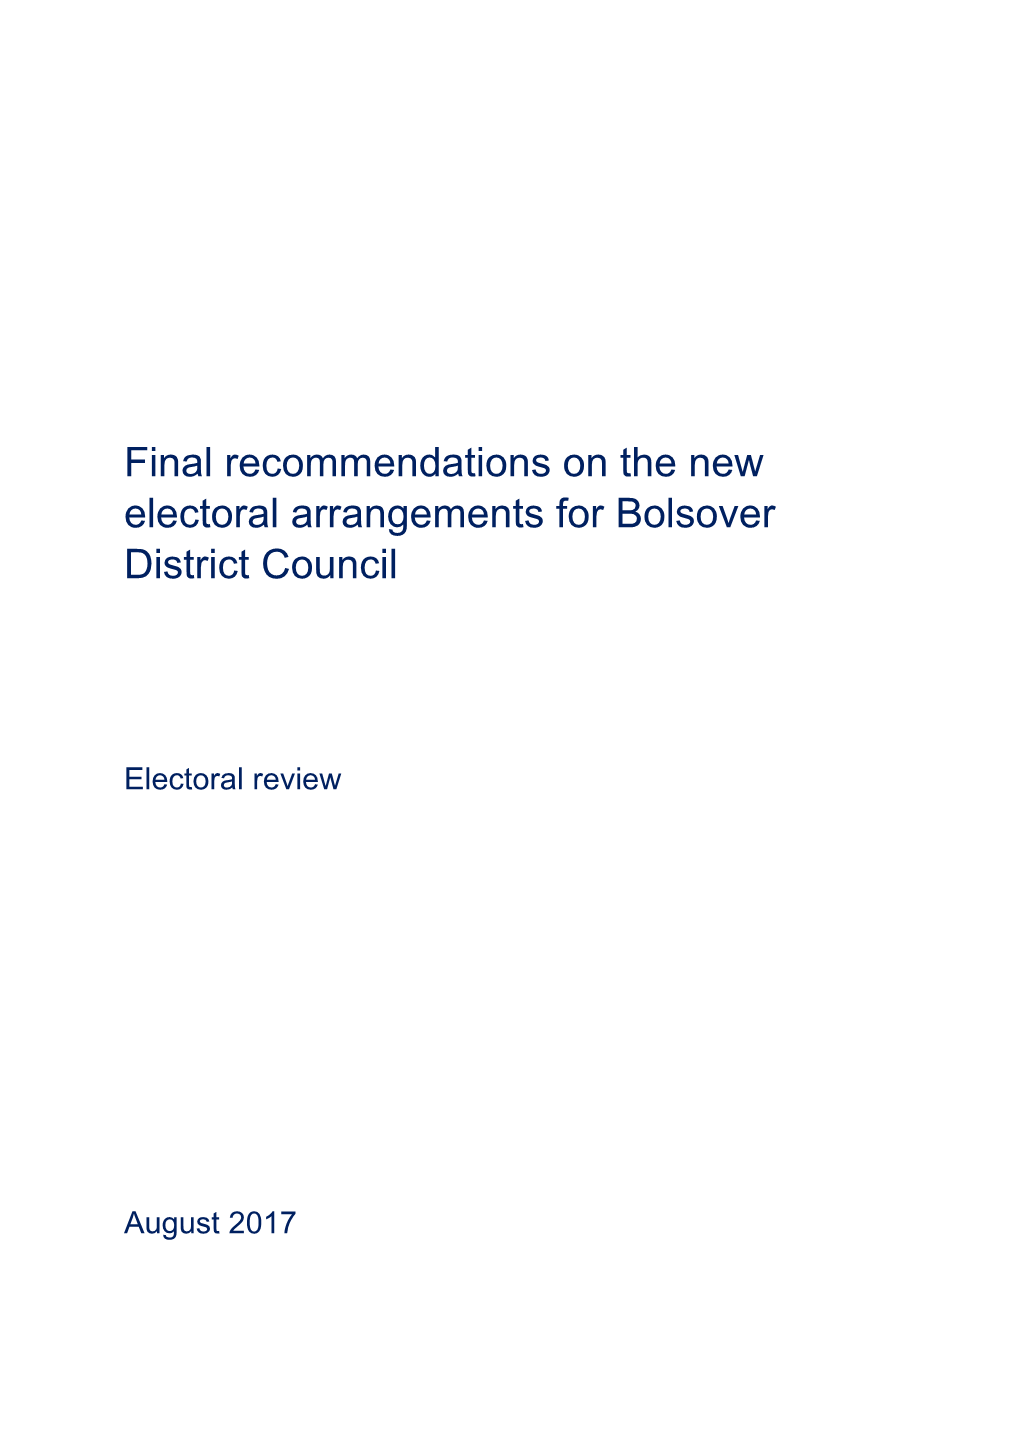 Final Recommendations on the New Electoral Arrangements for Bolsover District Council